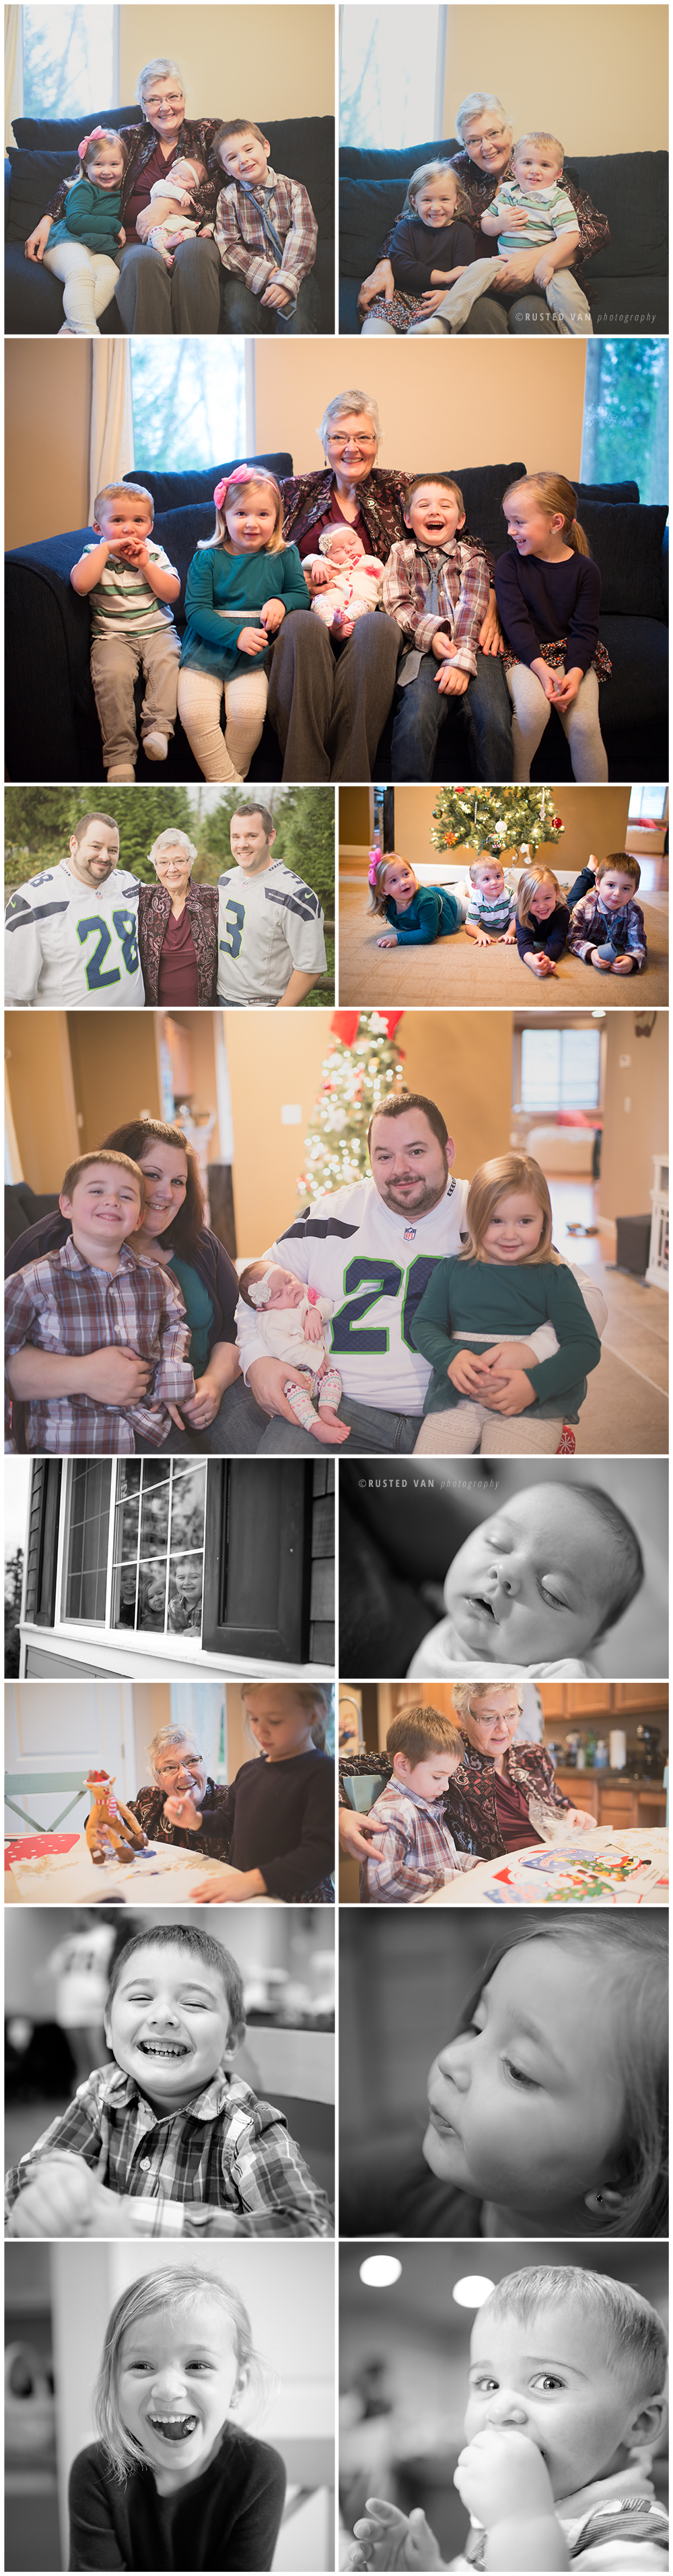 Tozer Family Session {by Rusted Van Photography}